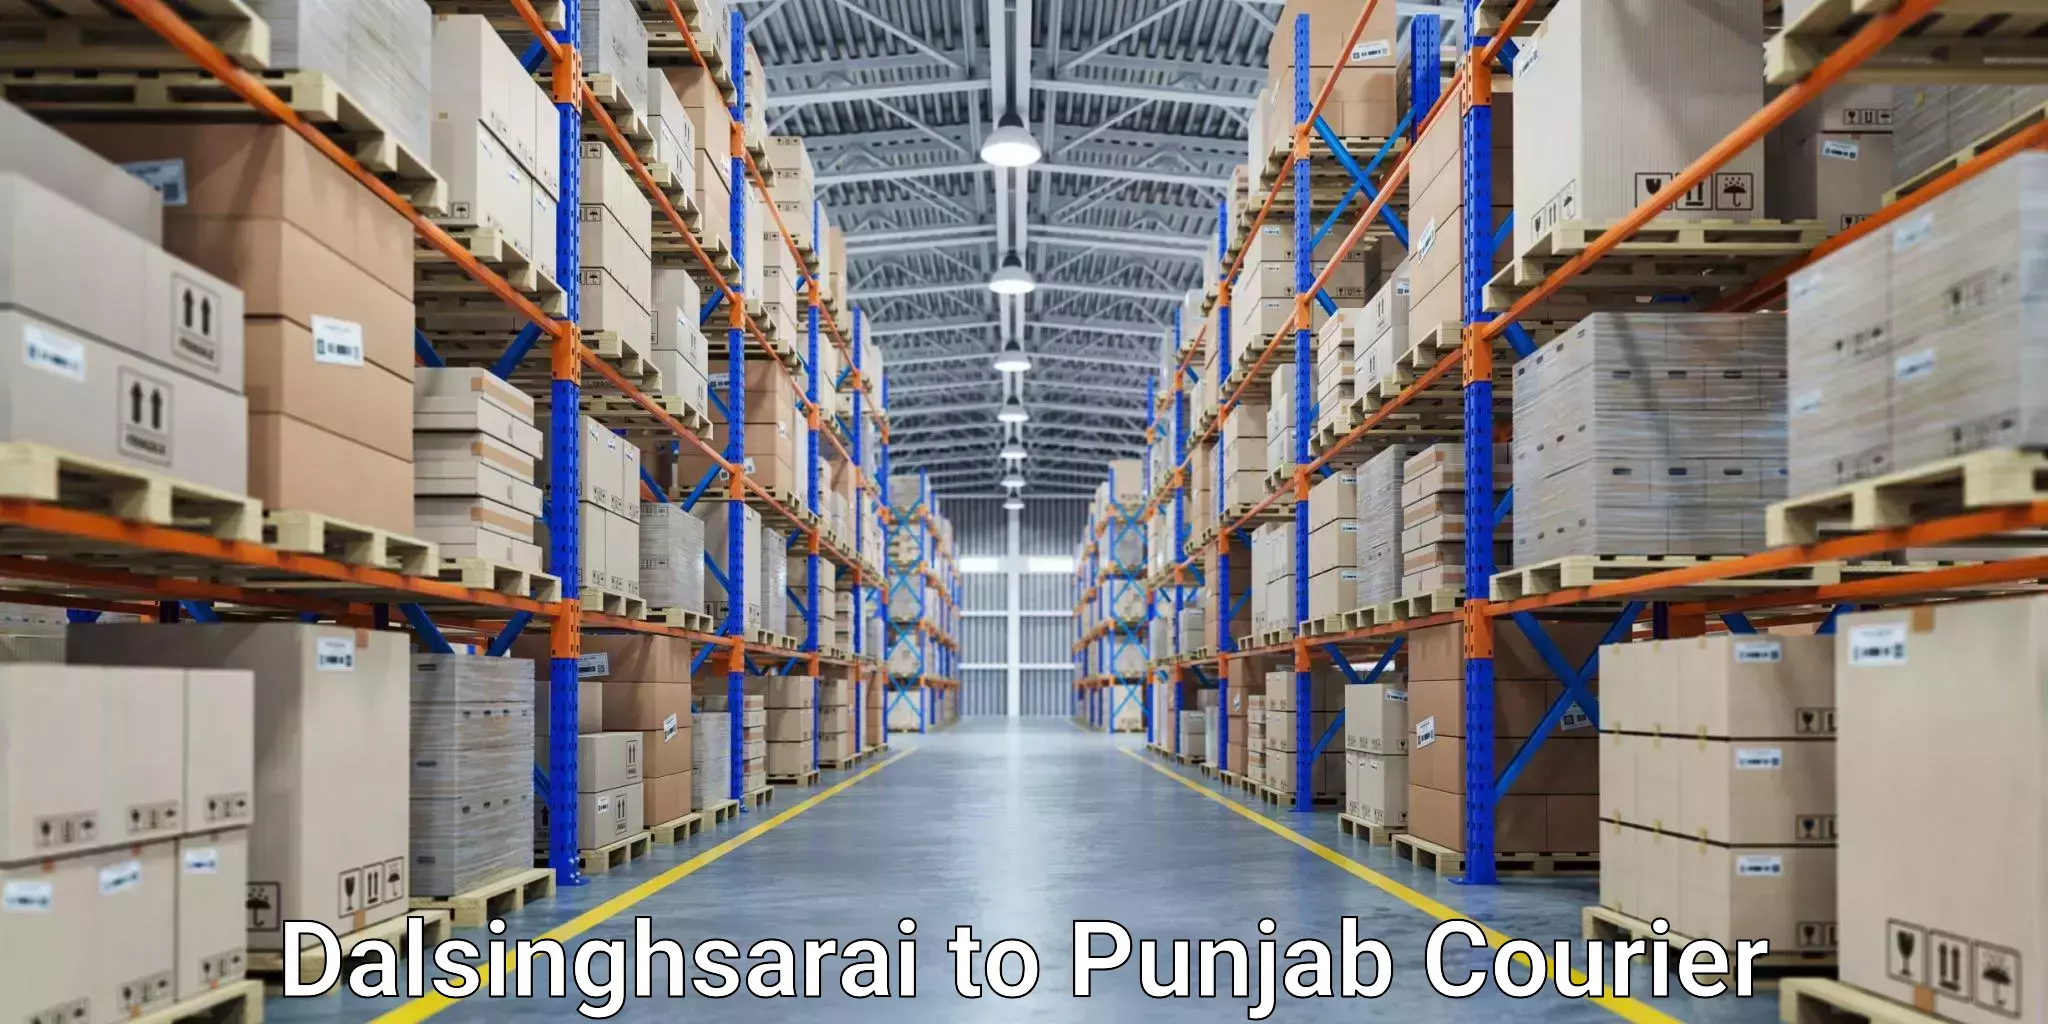 On-time delivery services Dalsinghsarai to Mohali